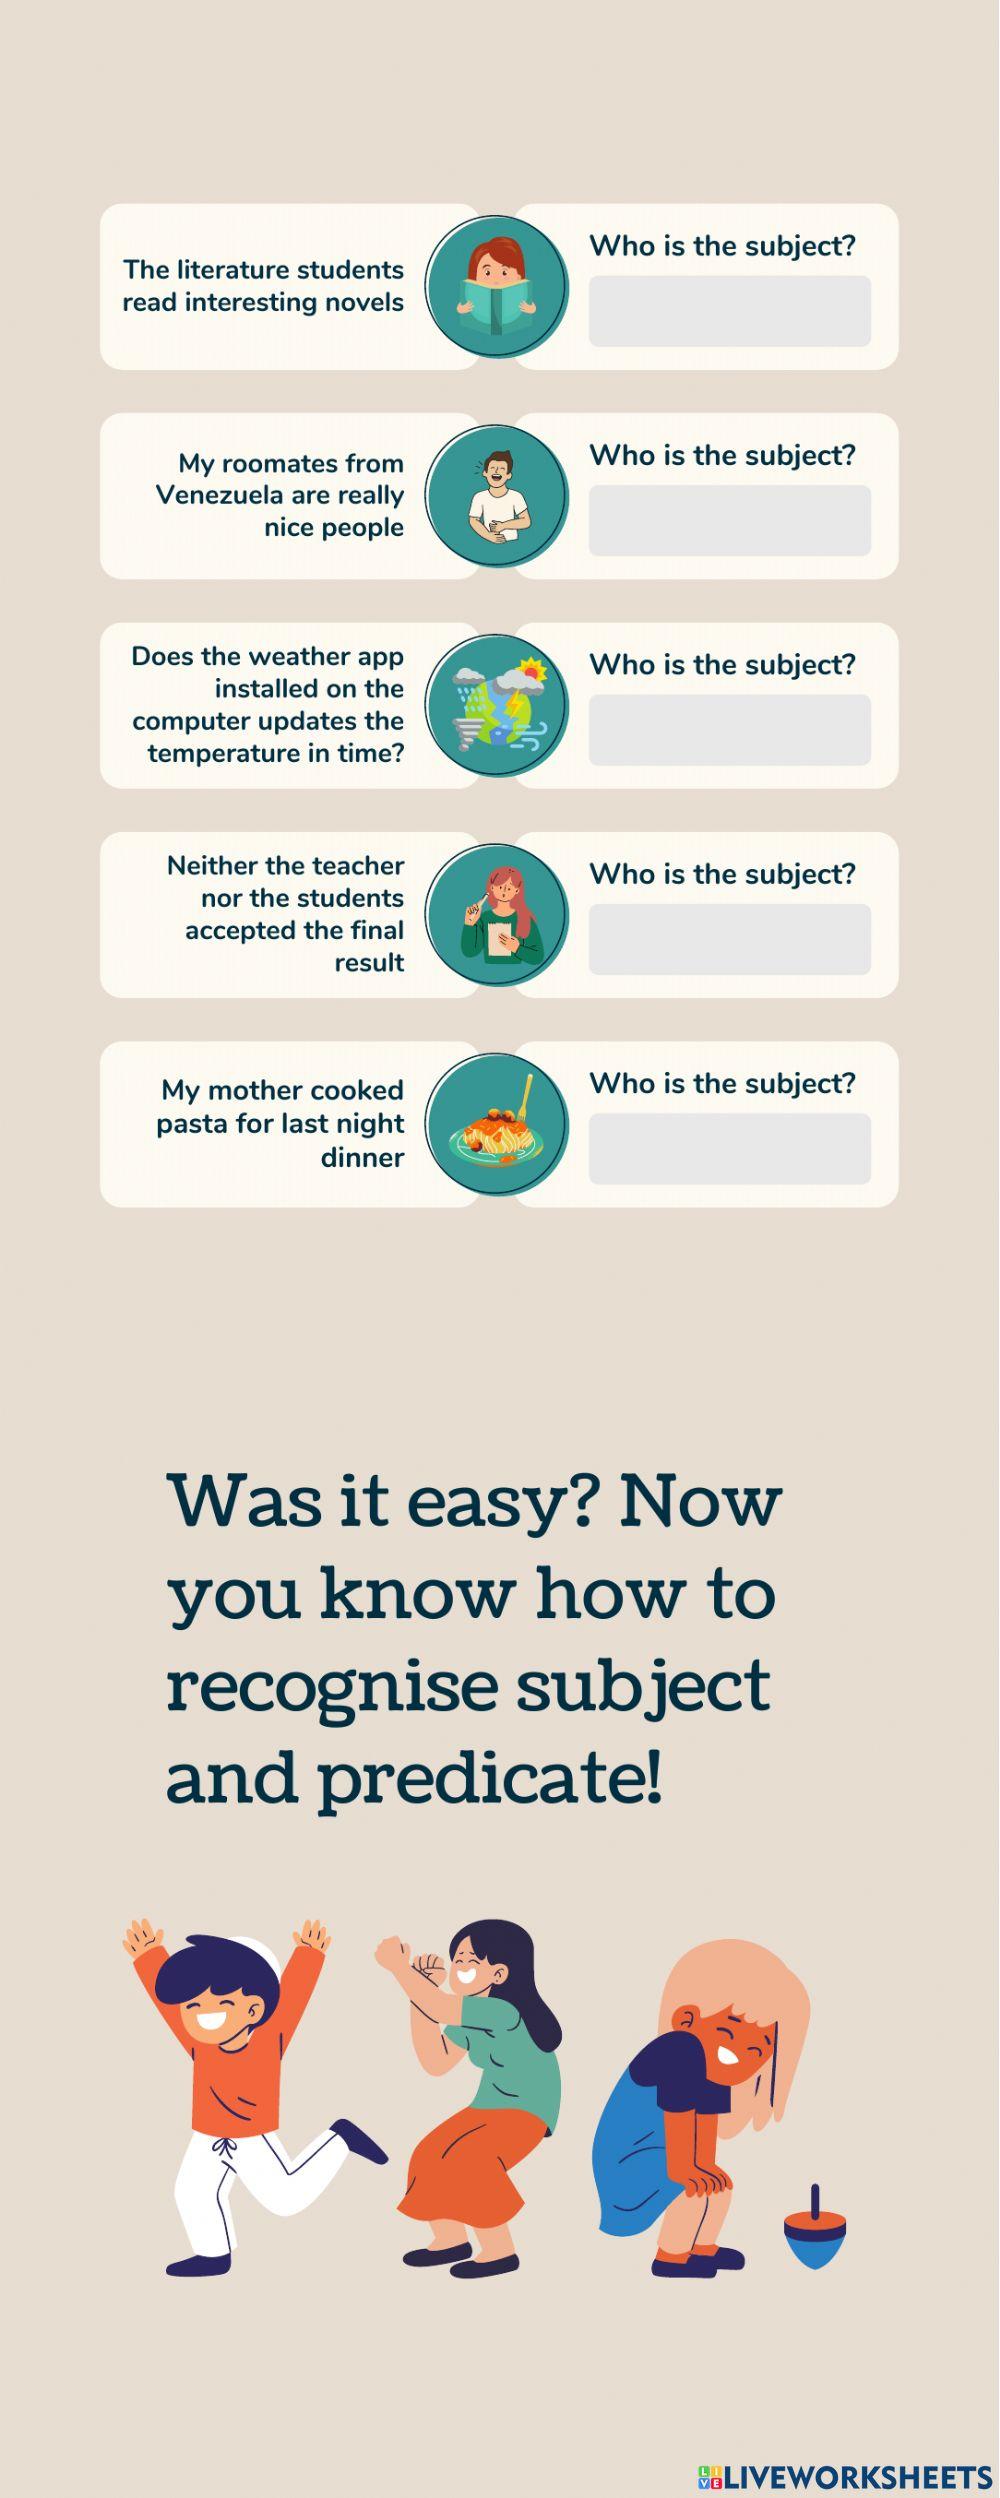 Subject and Predicate in English